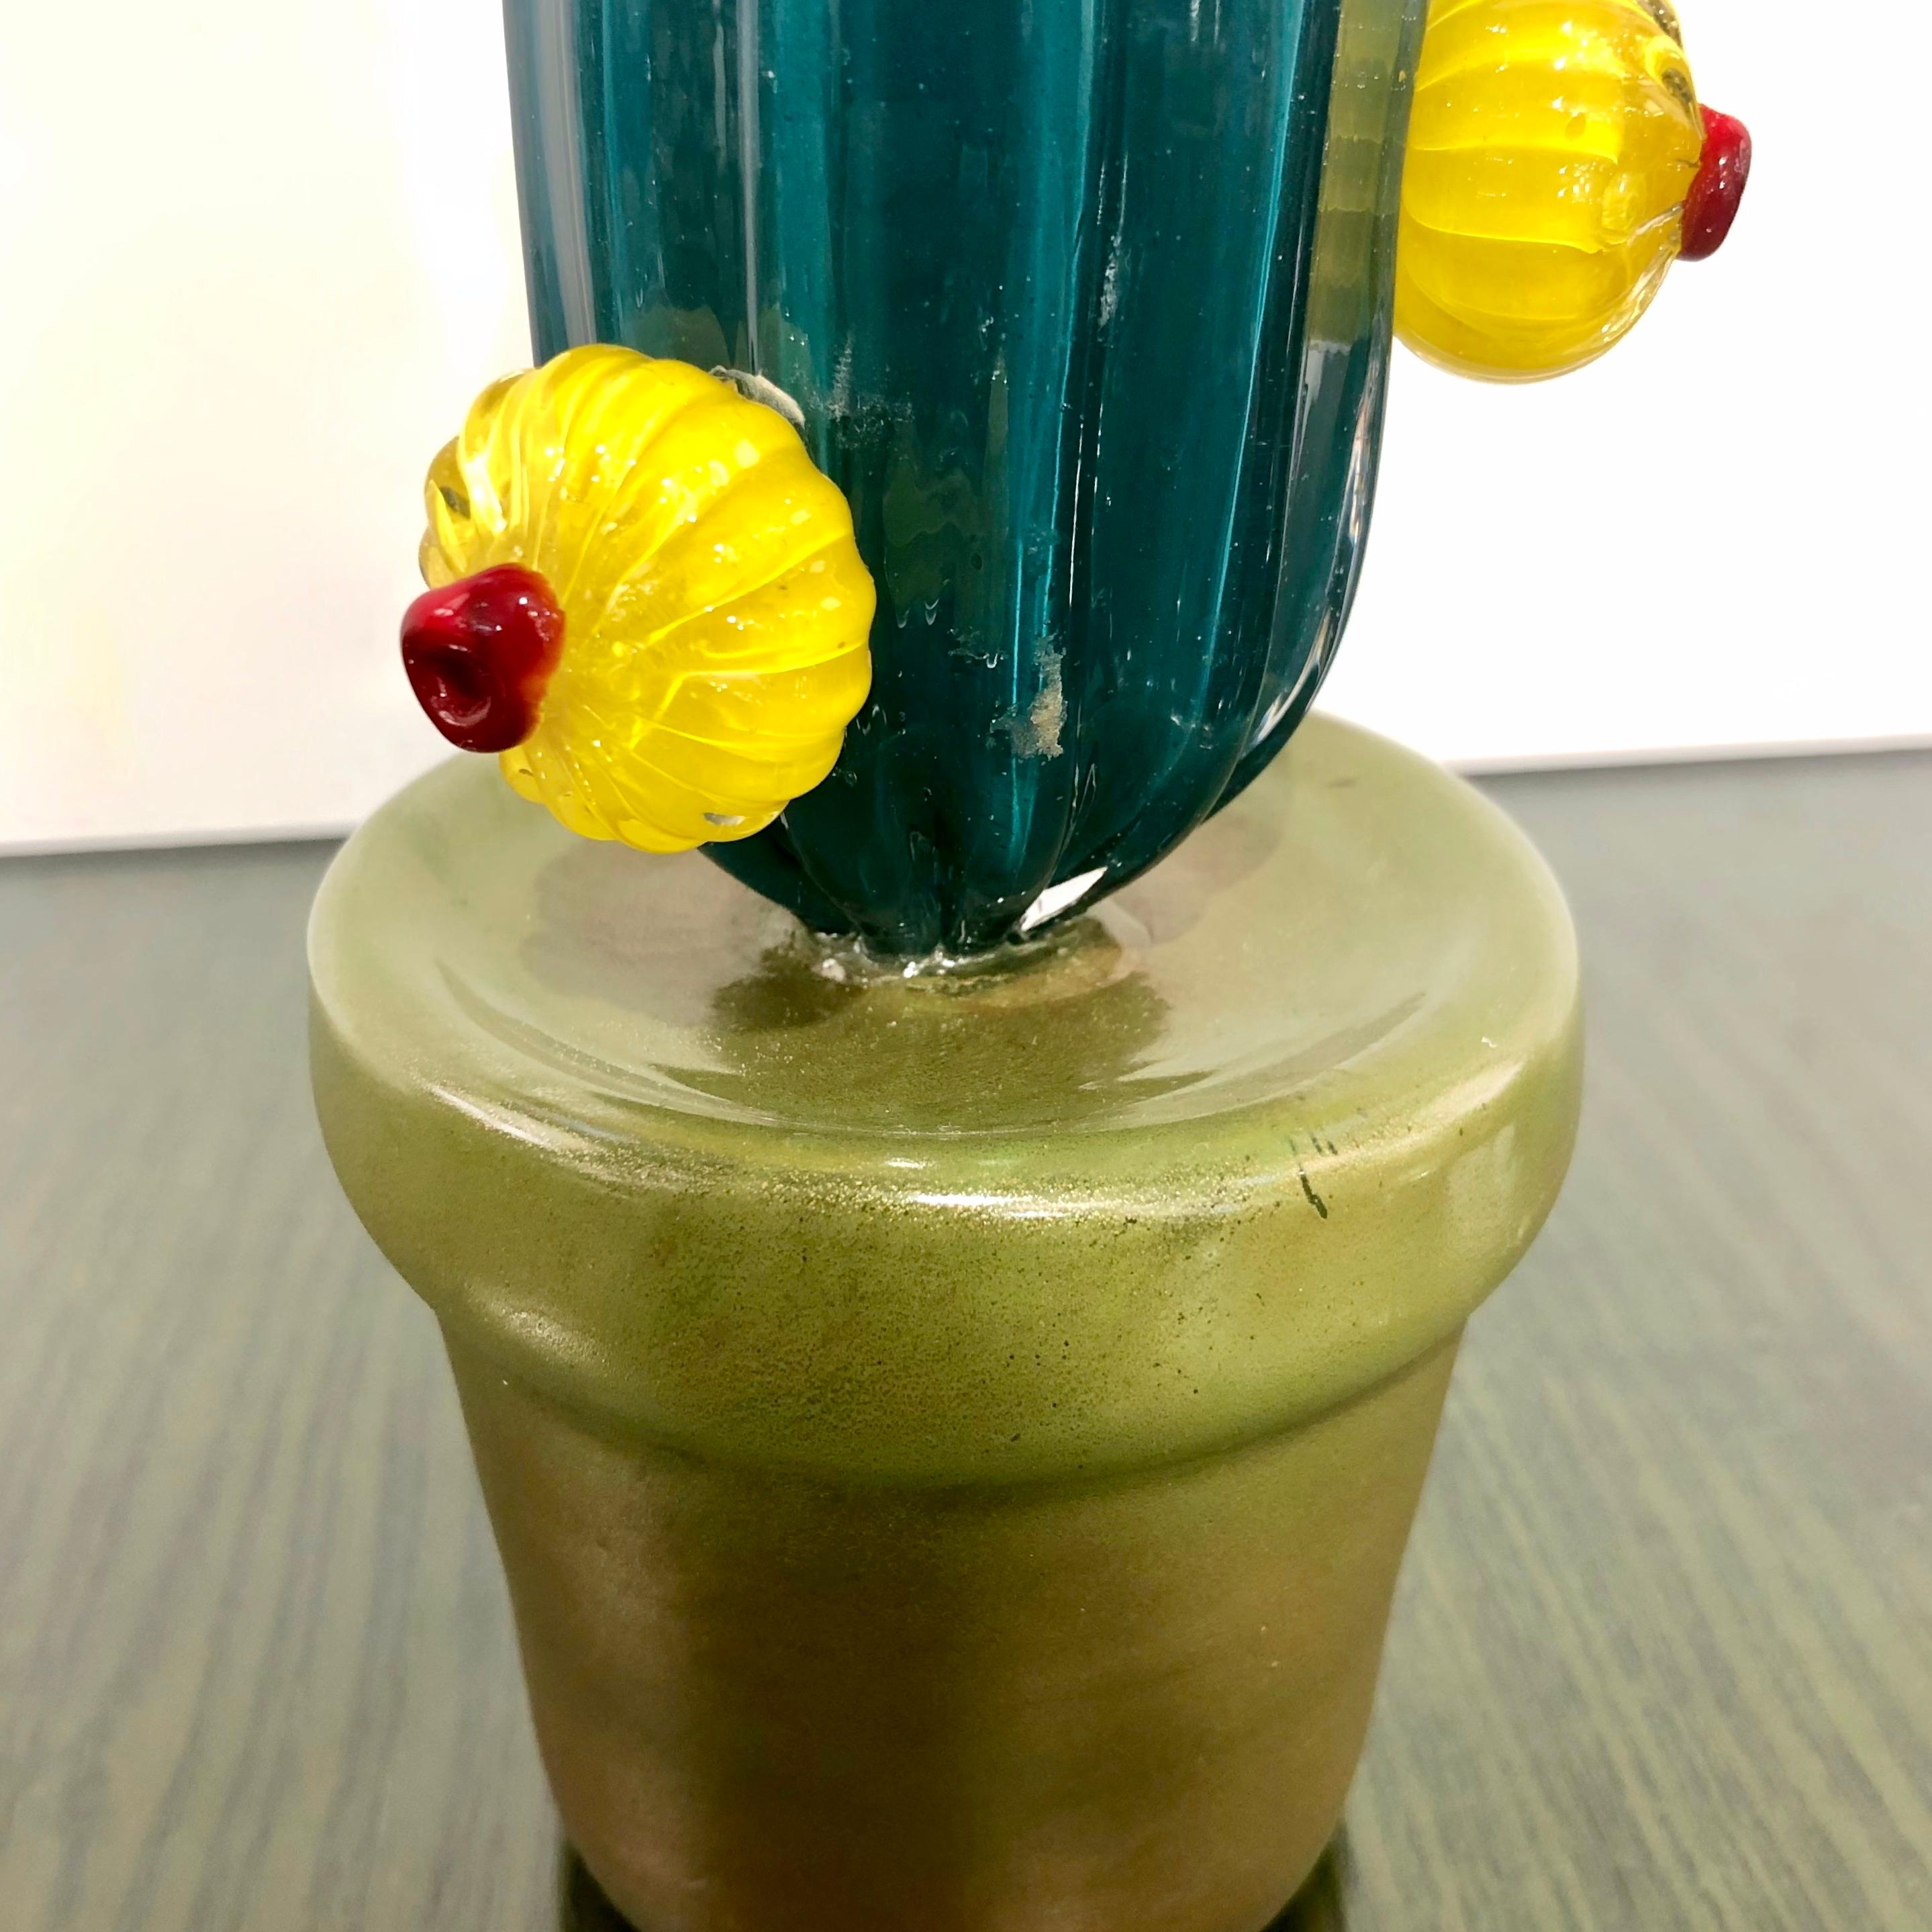 Organic Modern 2000s Italian Teal Gold Green Murano Art Glass Cactus Plant with Yellow Flowers For Sale